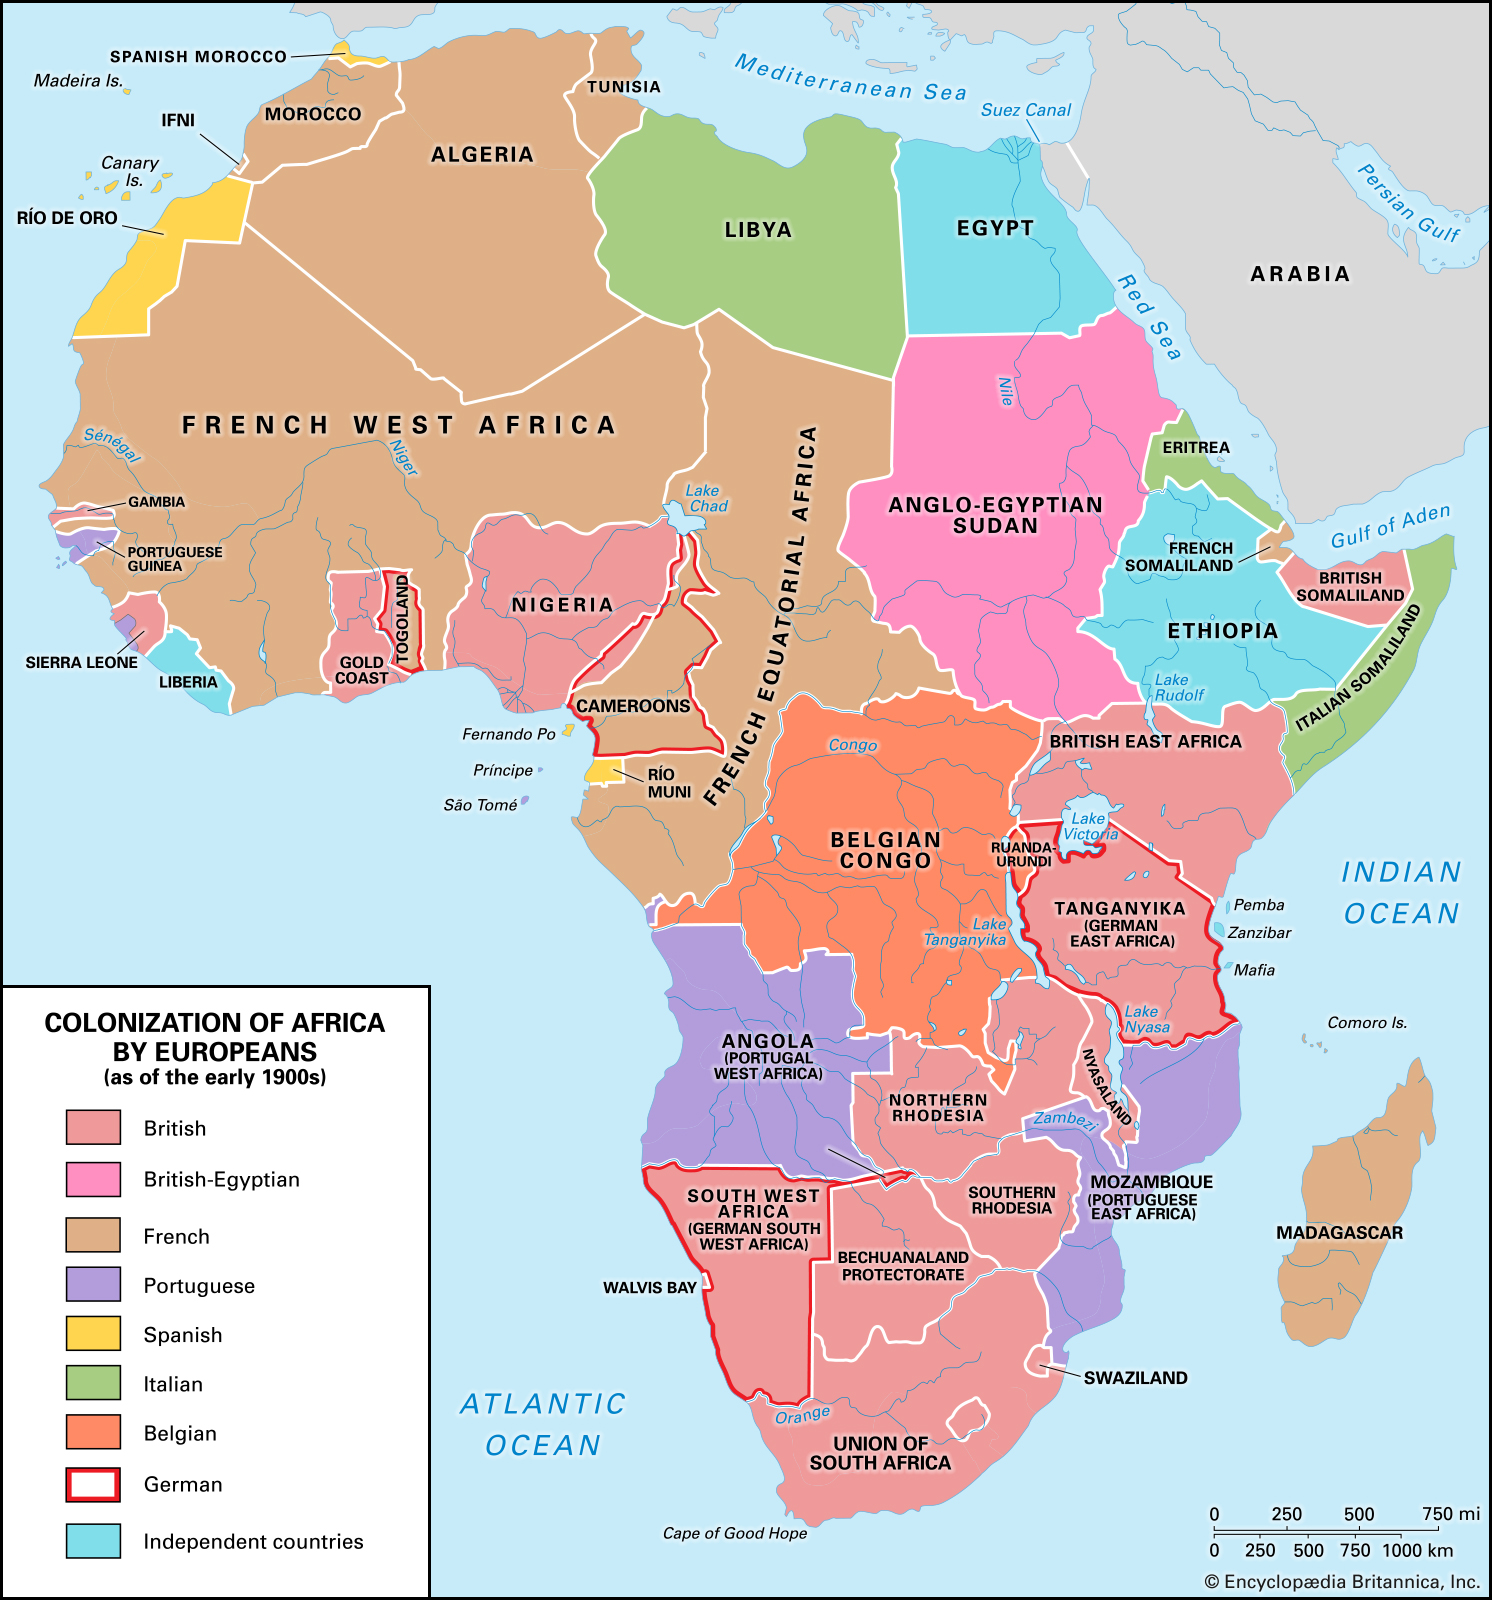 A modern political map of Africa, depicting the colonial holdings of European powers within Africa at the beginning of the 20th century